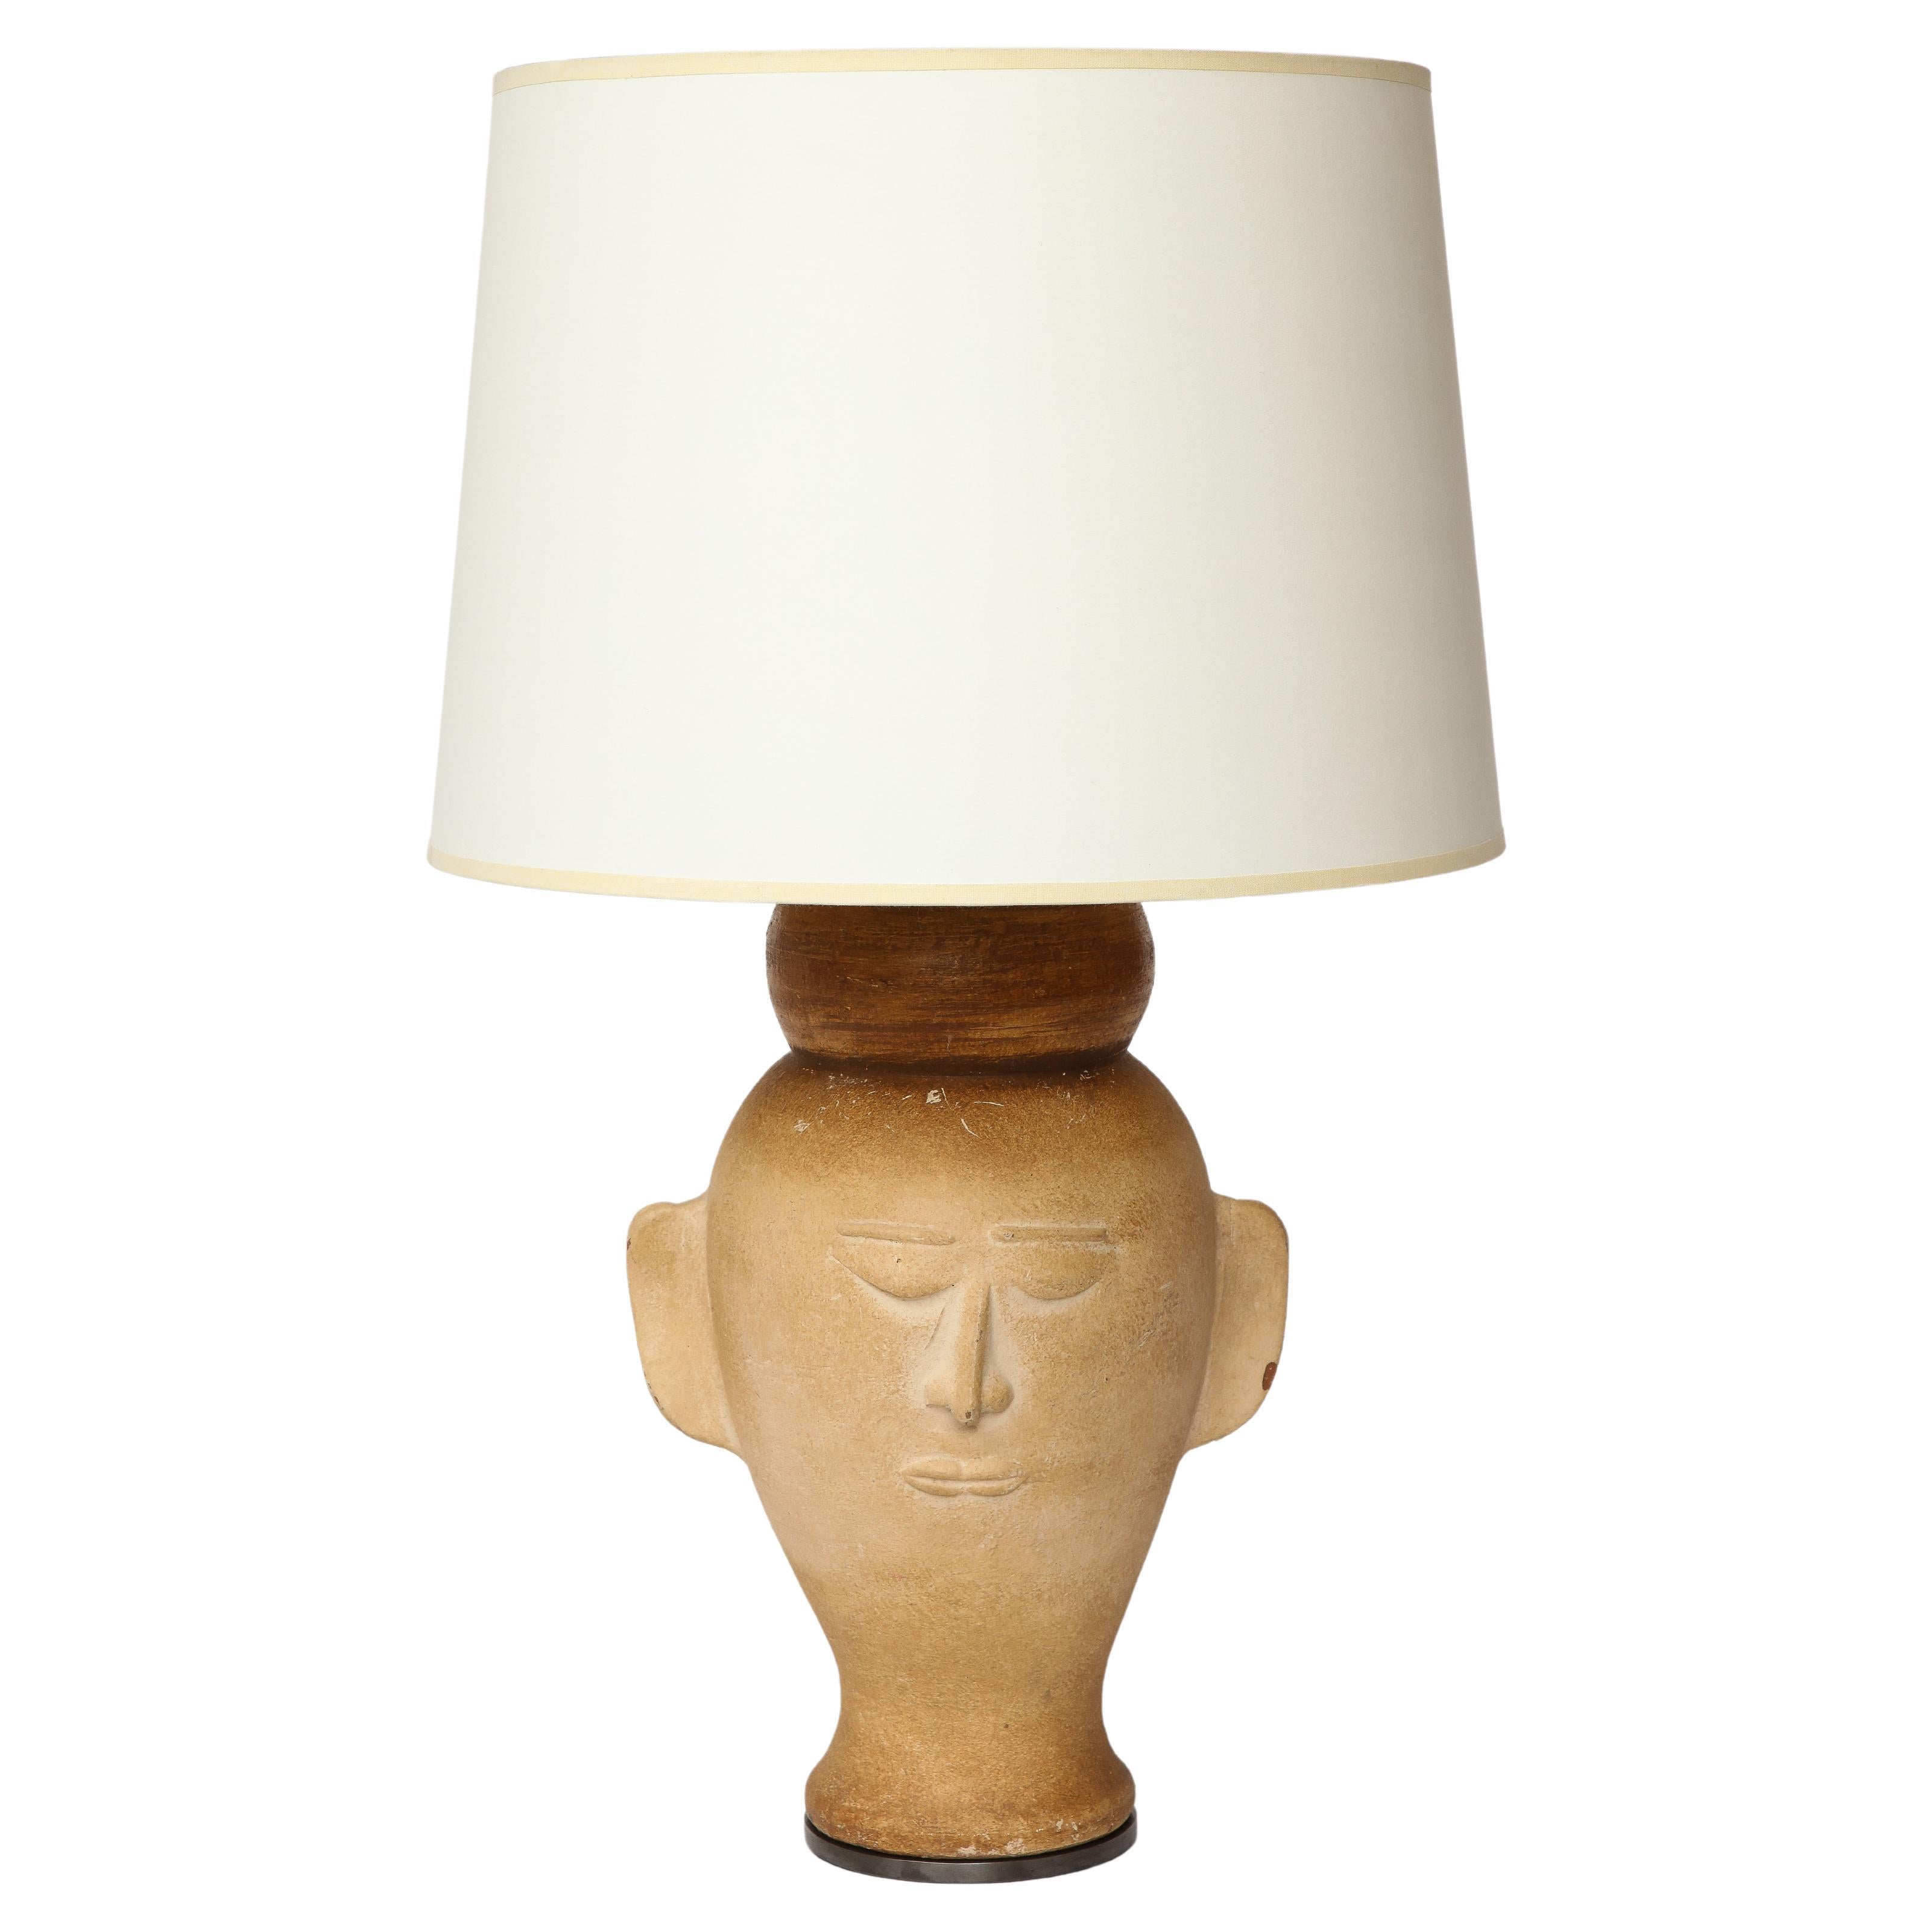 Terracotta Bust Table Lamp with Darkened Metal Base, 20th C. For Sale